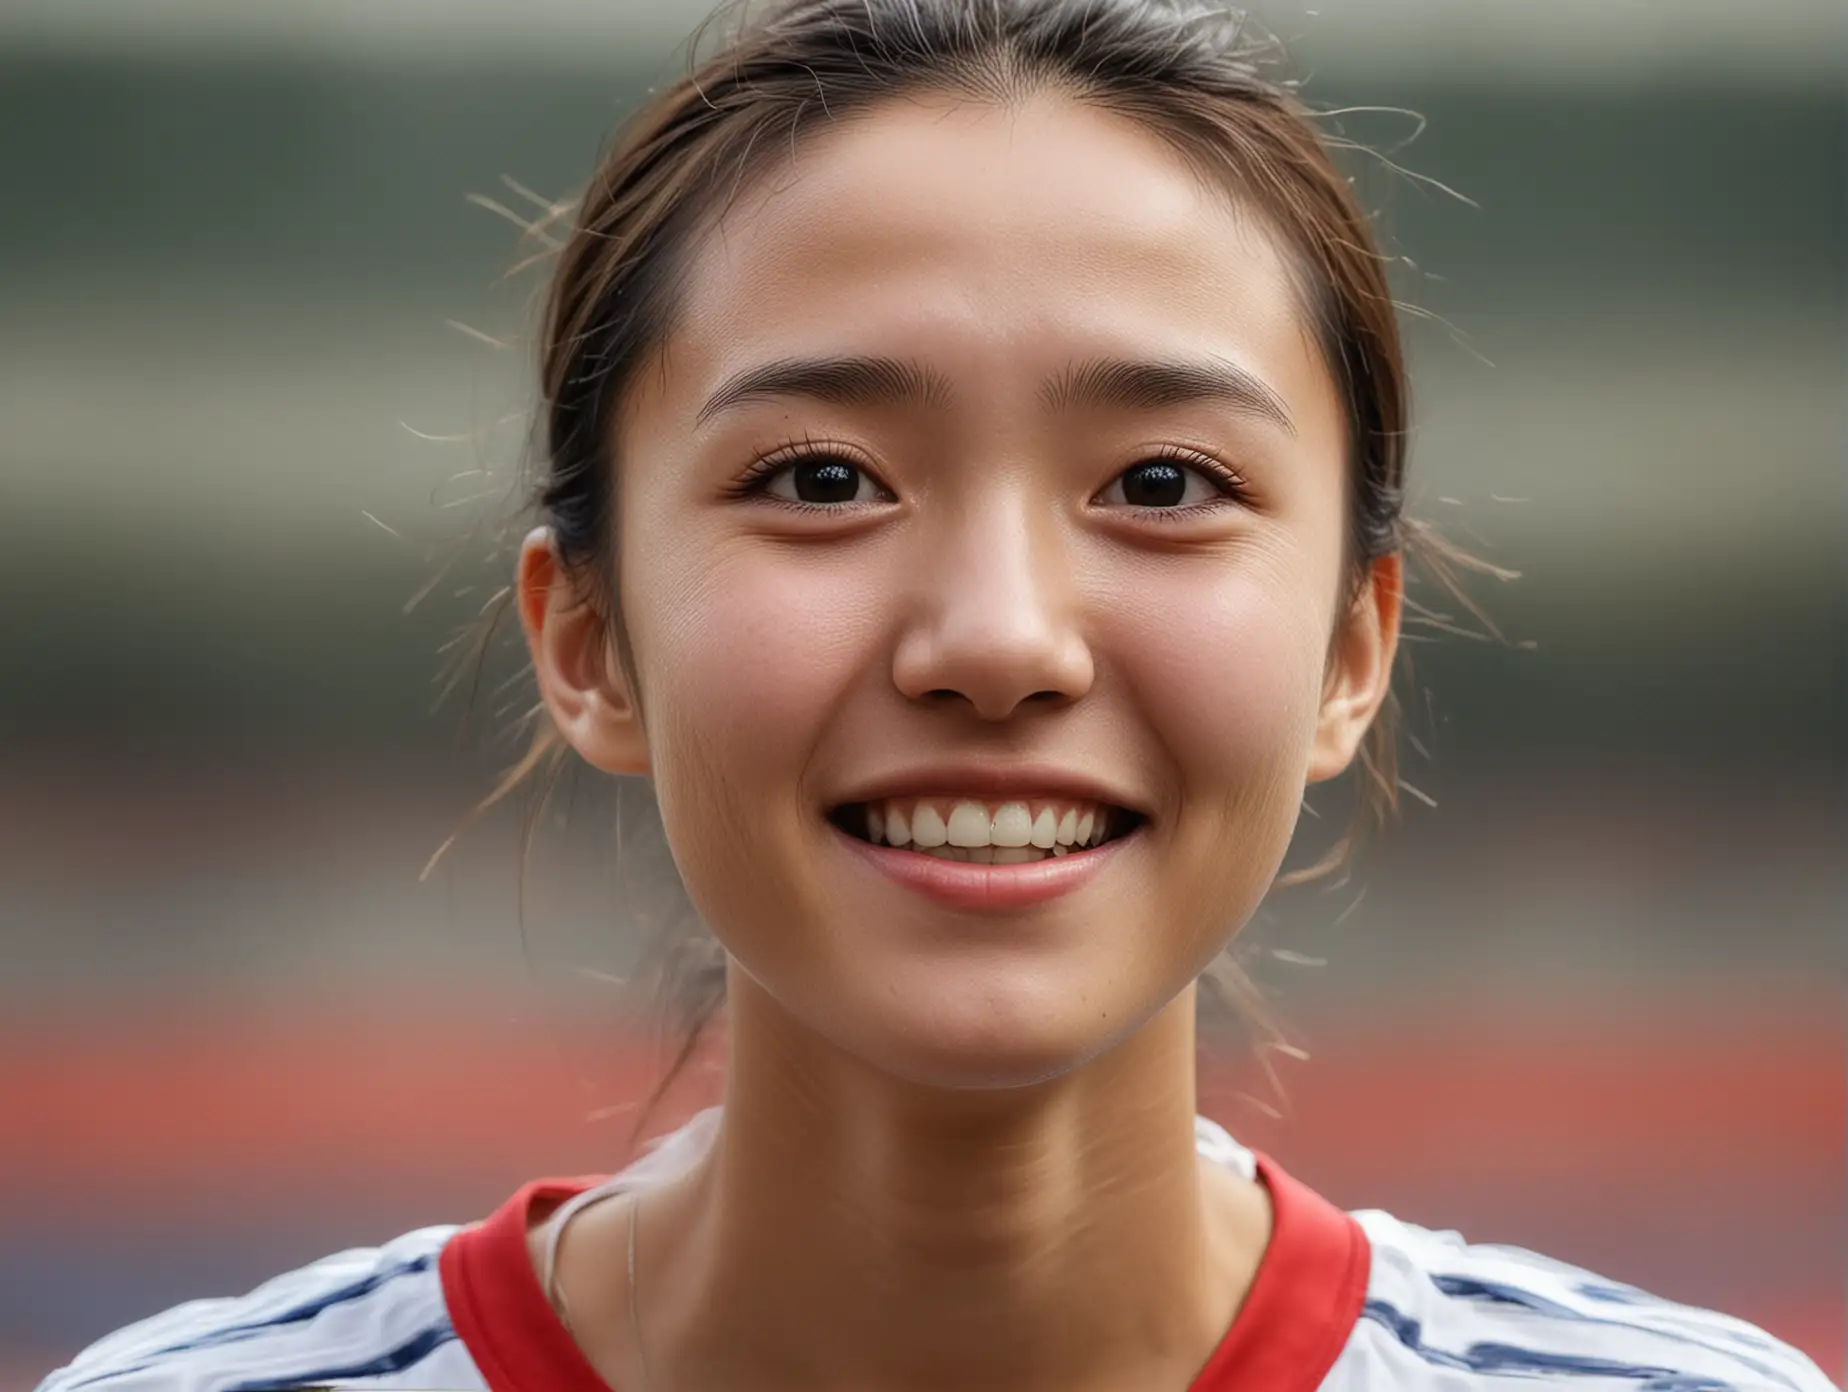 Close up natural face without make-up of an extremely beautiful skinny soccer girl from Shenyang overwhelmed with joy, moments after a glorious goal.